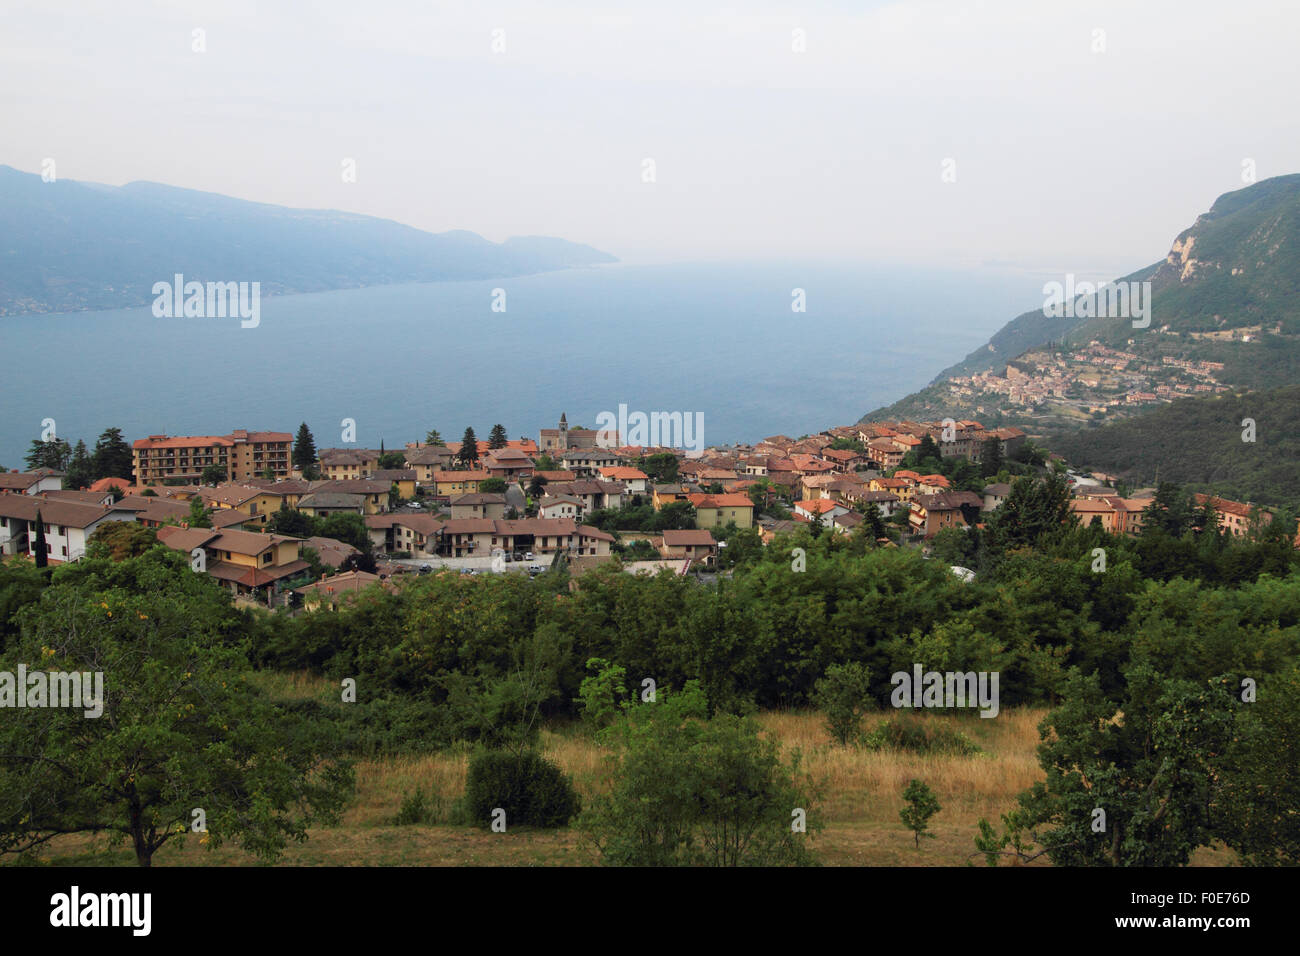 Gardola in Tignale by Lake Garda in Italy. Pair of images photographed just before and just after sunrise (image id F0E76D and F0E76J) Stock Photo